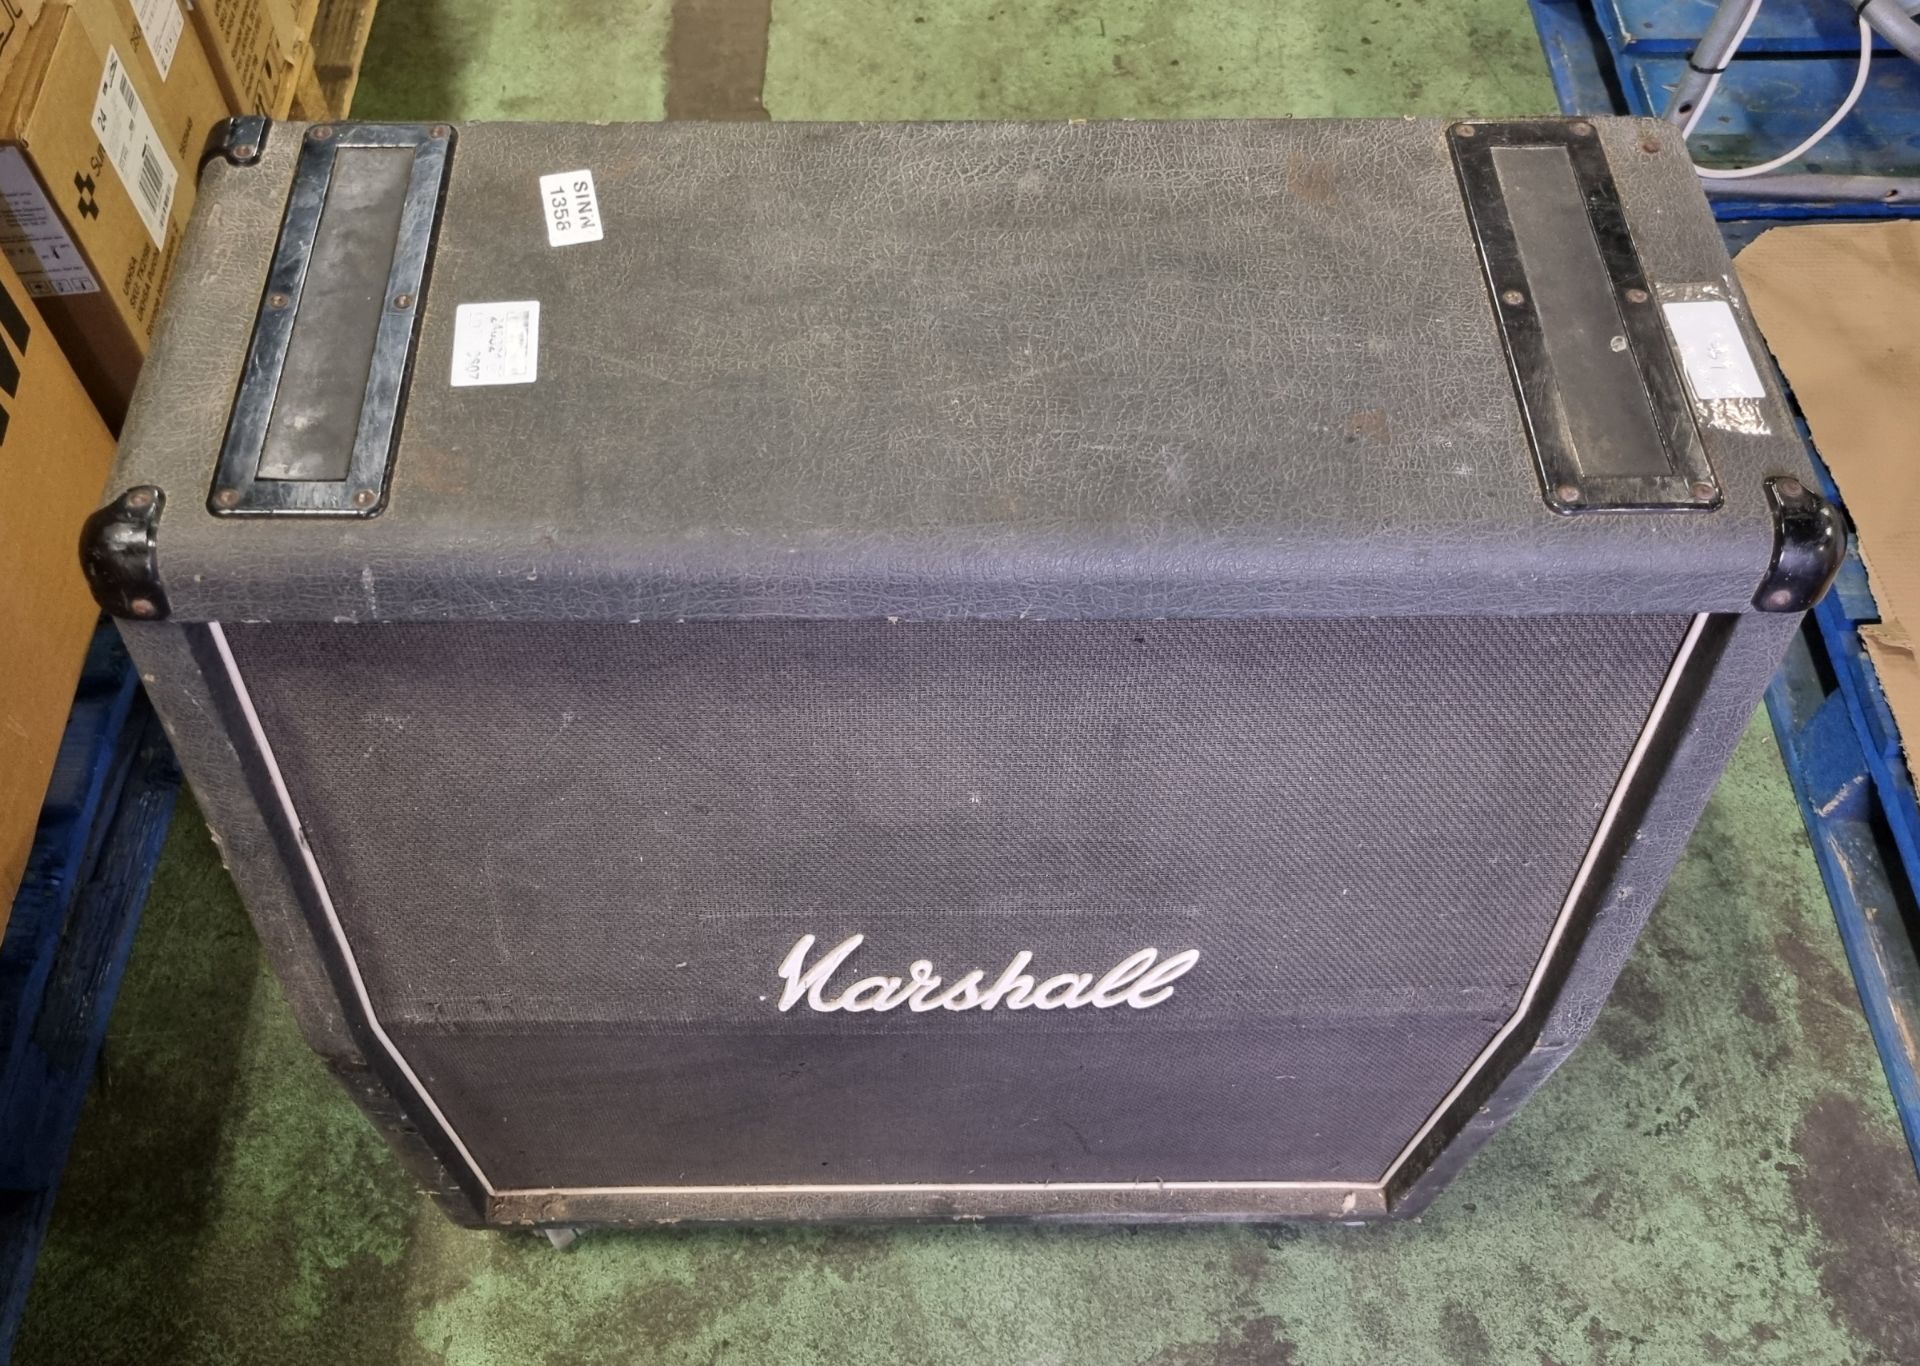 Marshall amplifier - MODEL UNKNOWN - Image 2 of 4